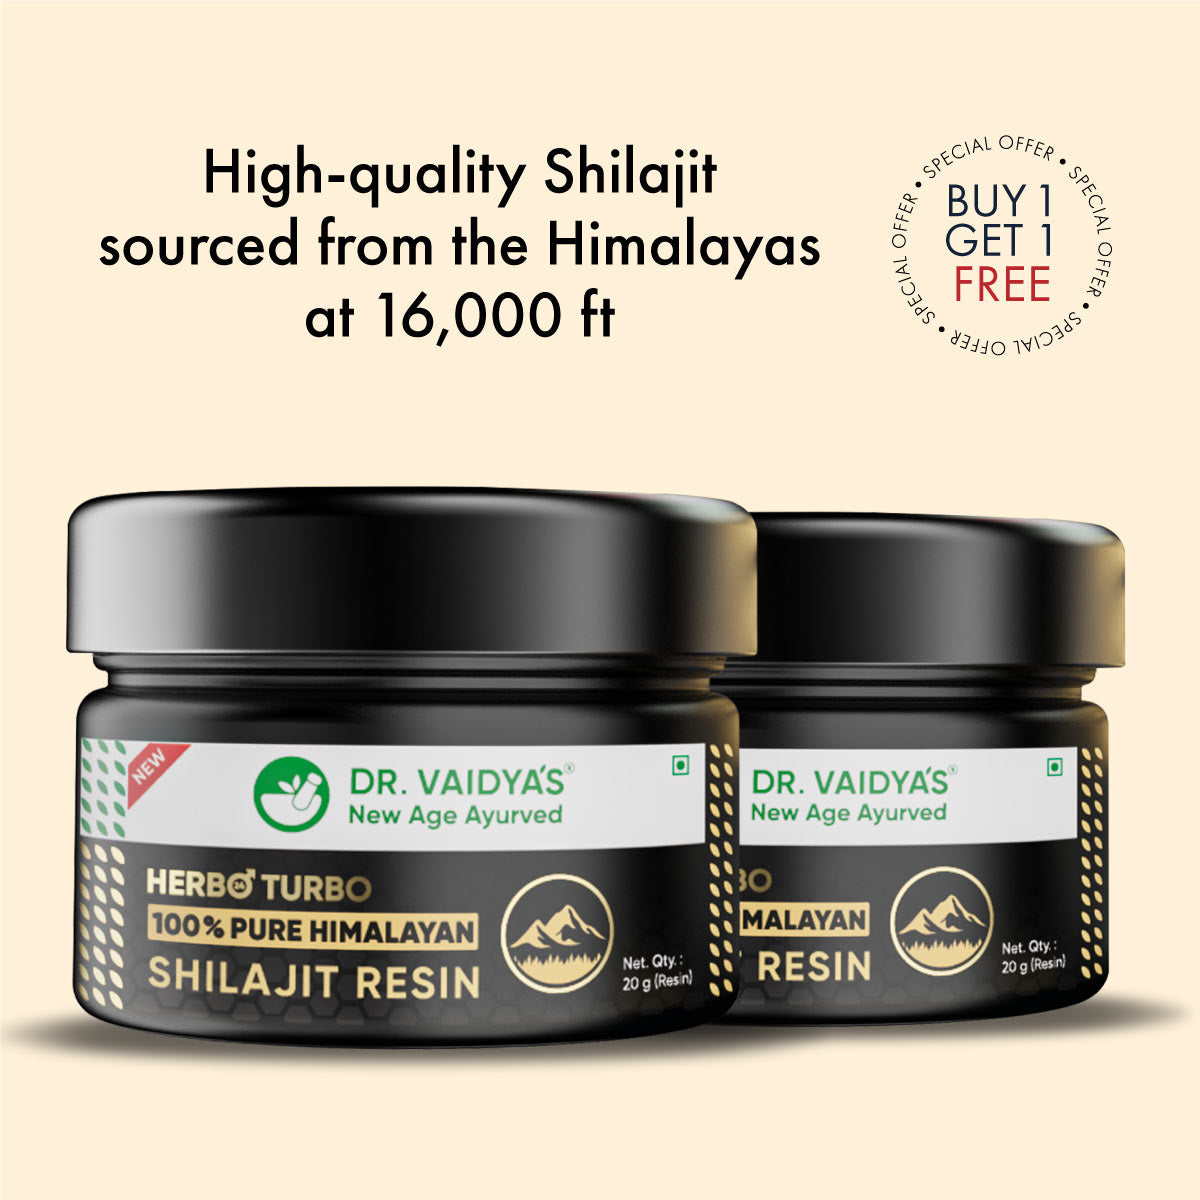 H24T Shilajit Resin: Made From 100% Pure Himalayan Shilajit To Help Boost Stamina, Strength & Energy